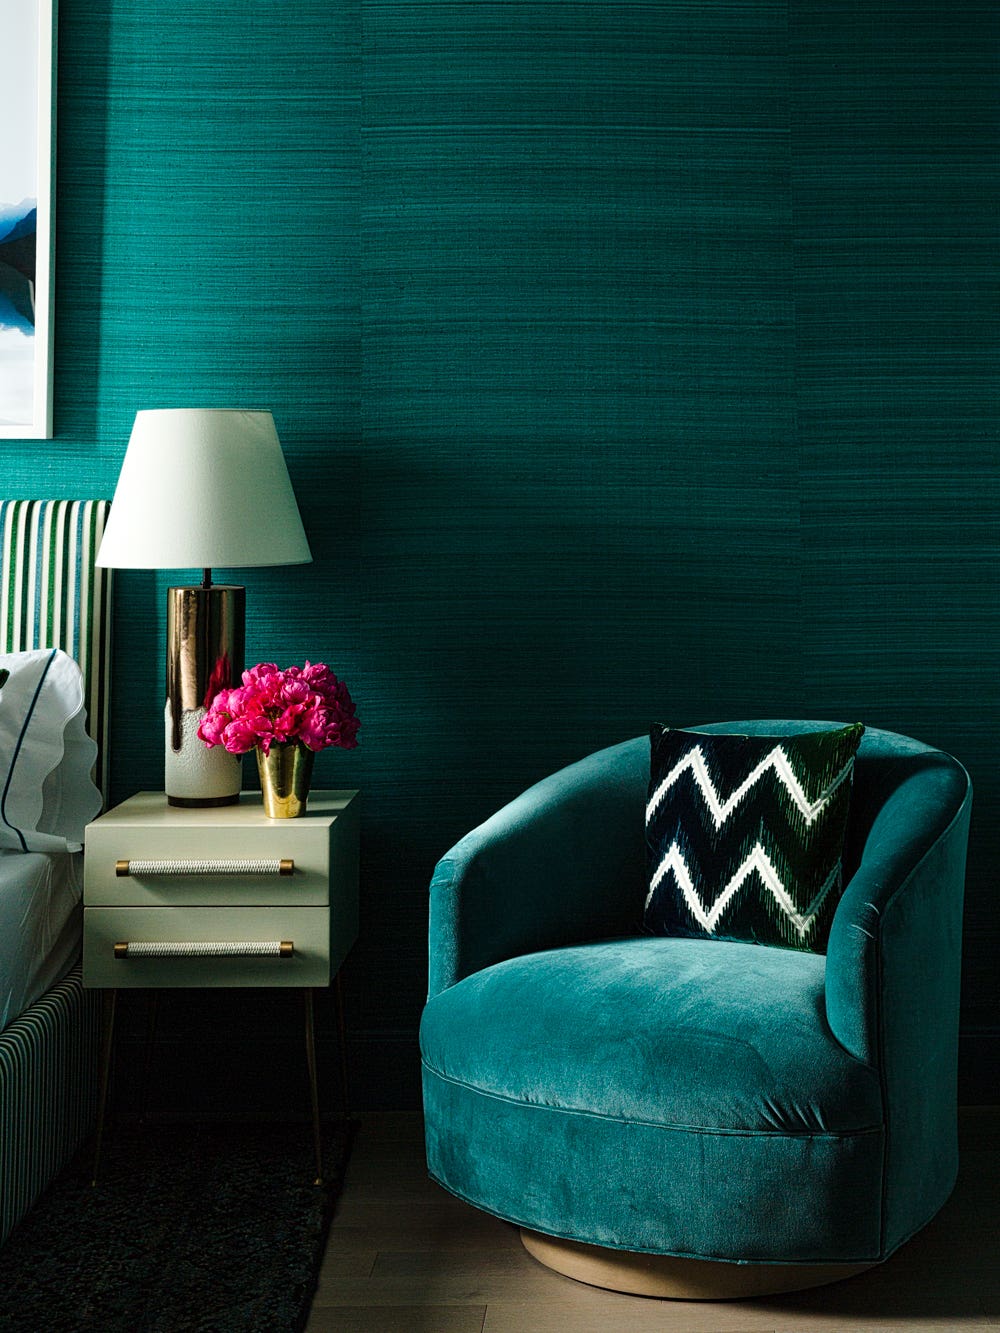 What Hue You Should Paint Each Room, According to Color Psychology